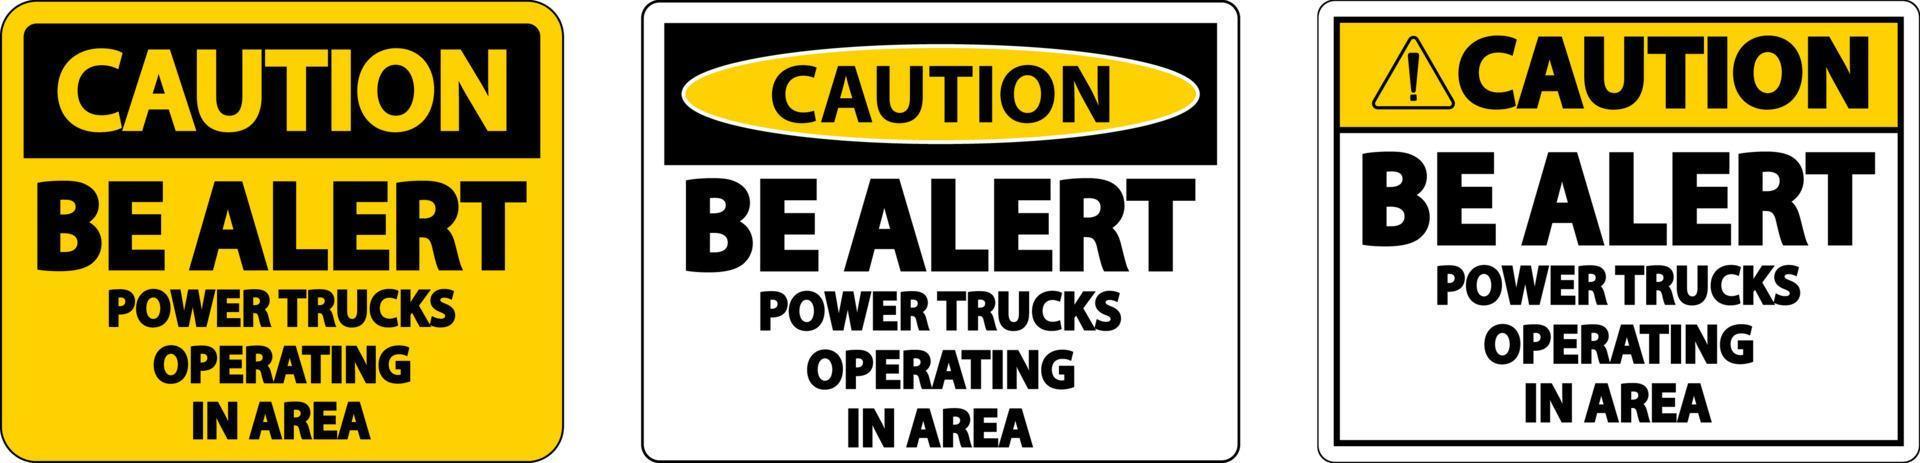 Caution Power Trucks Operating Sign On White Background vector